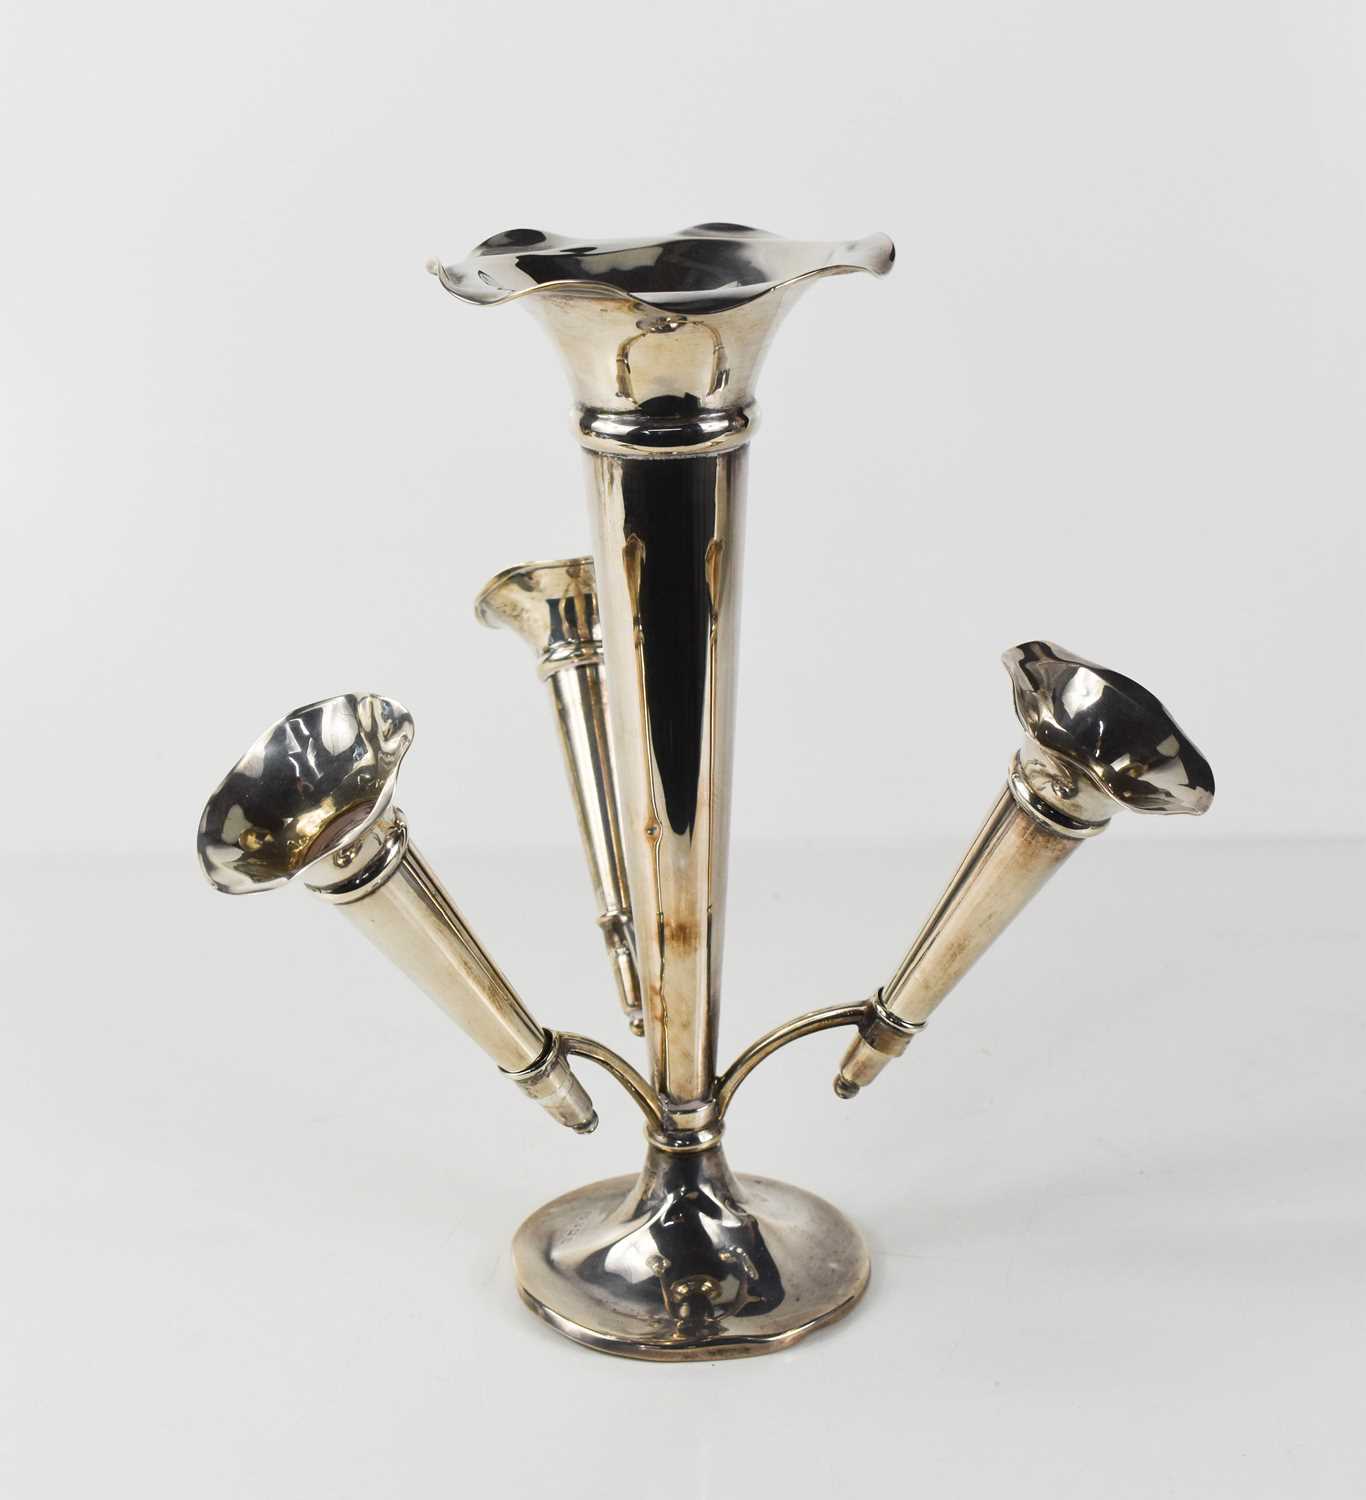 A silver epergne, with central flared trumpet vase, with fluted rim, surounded by three smaller